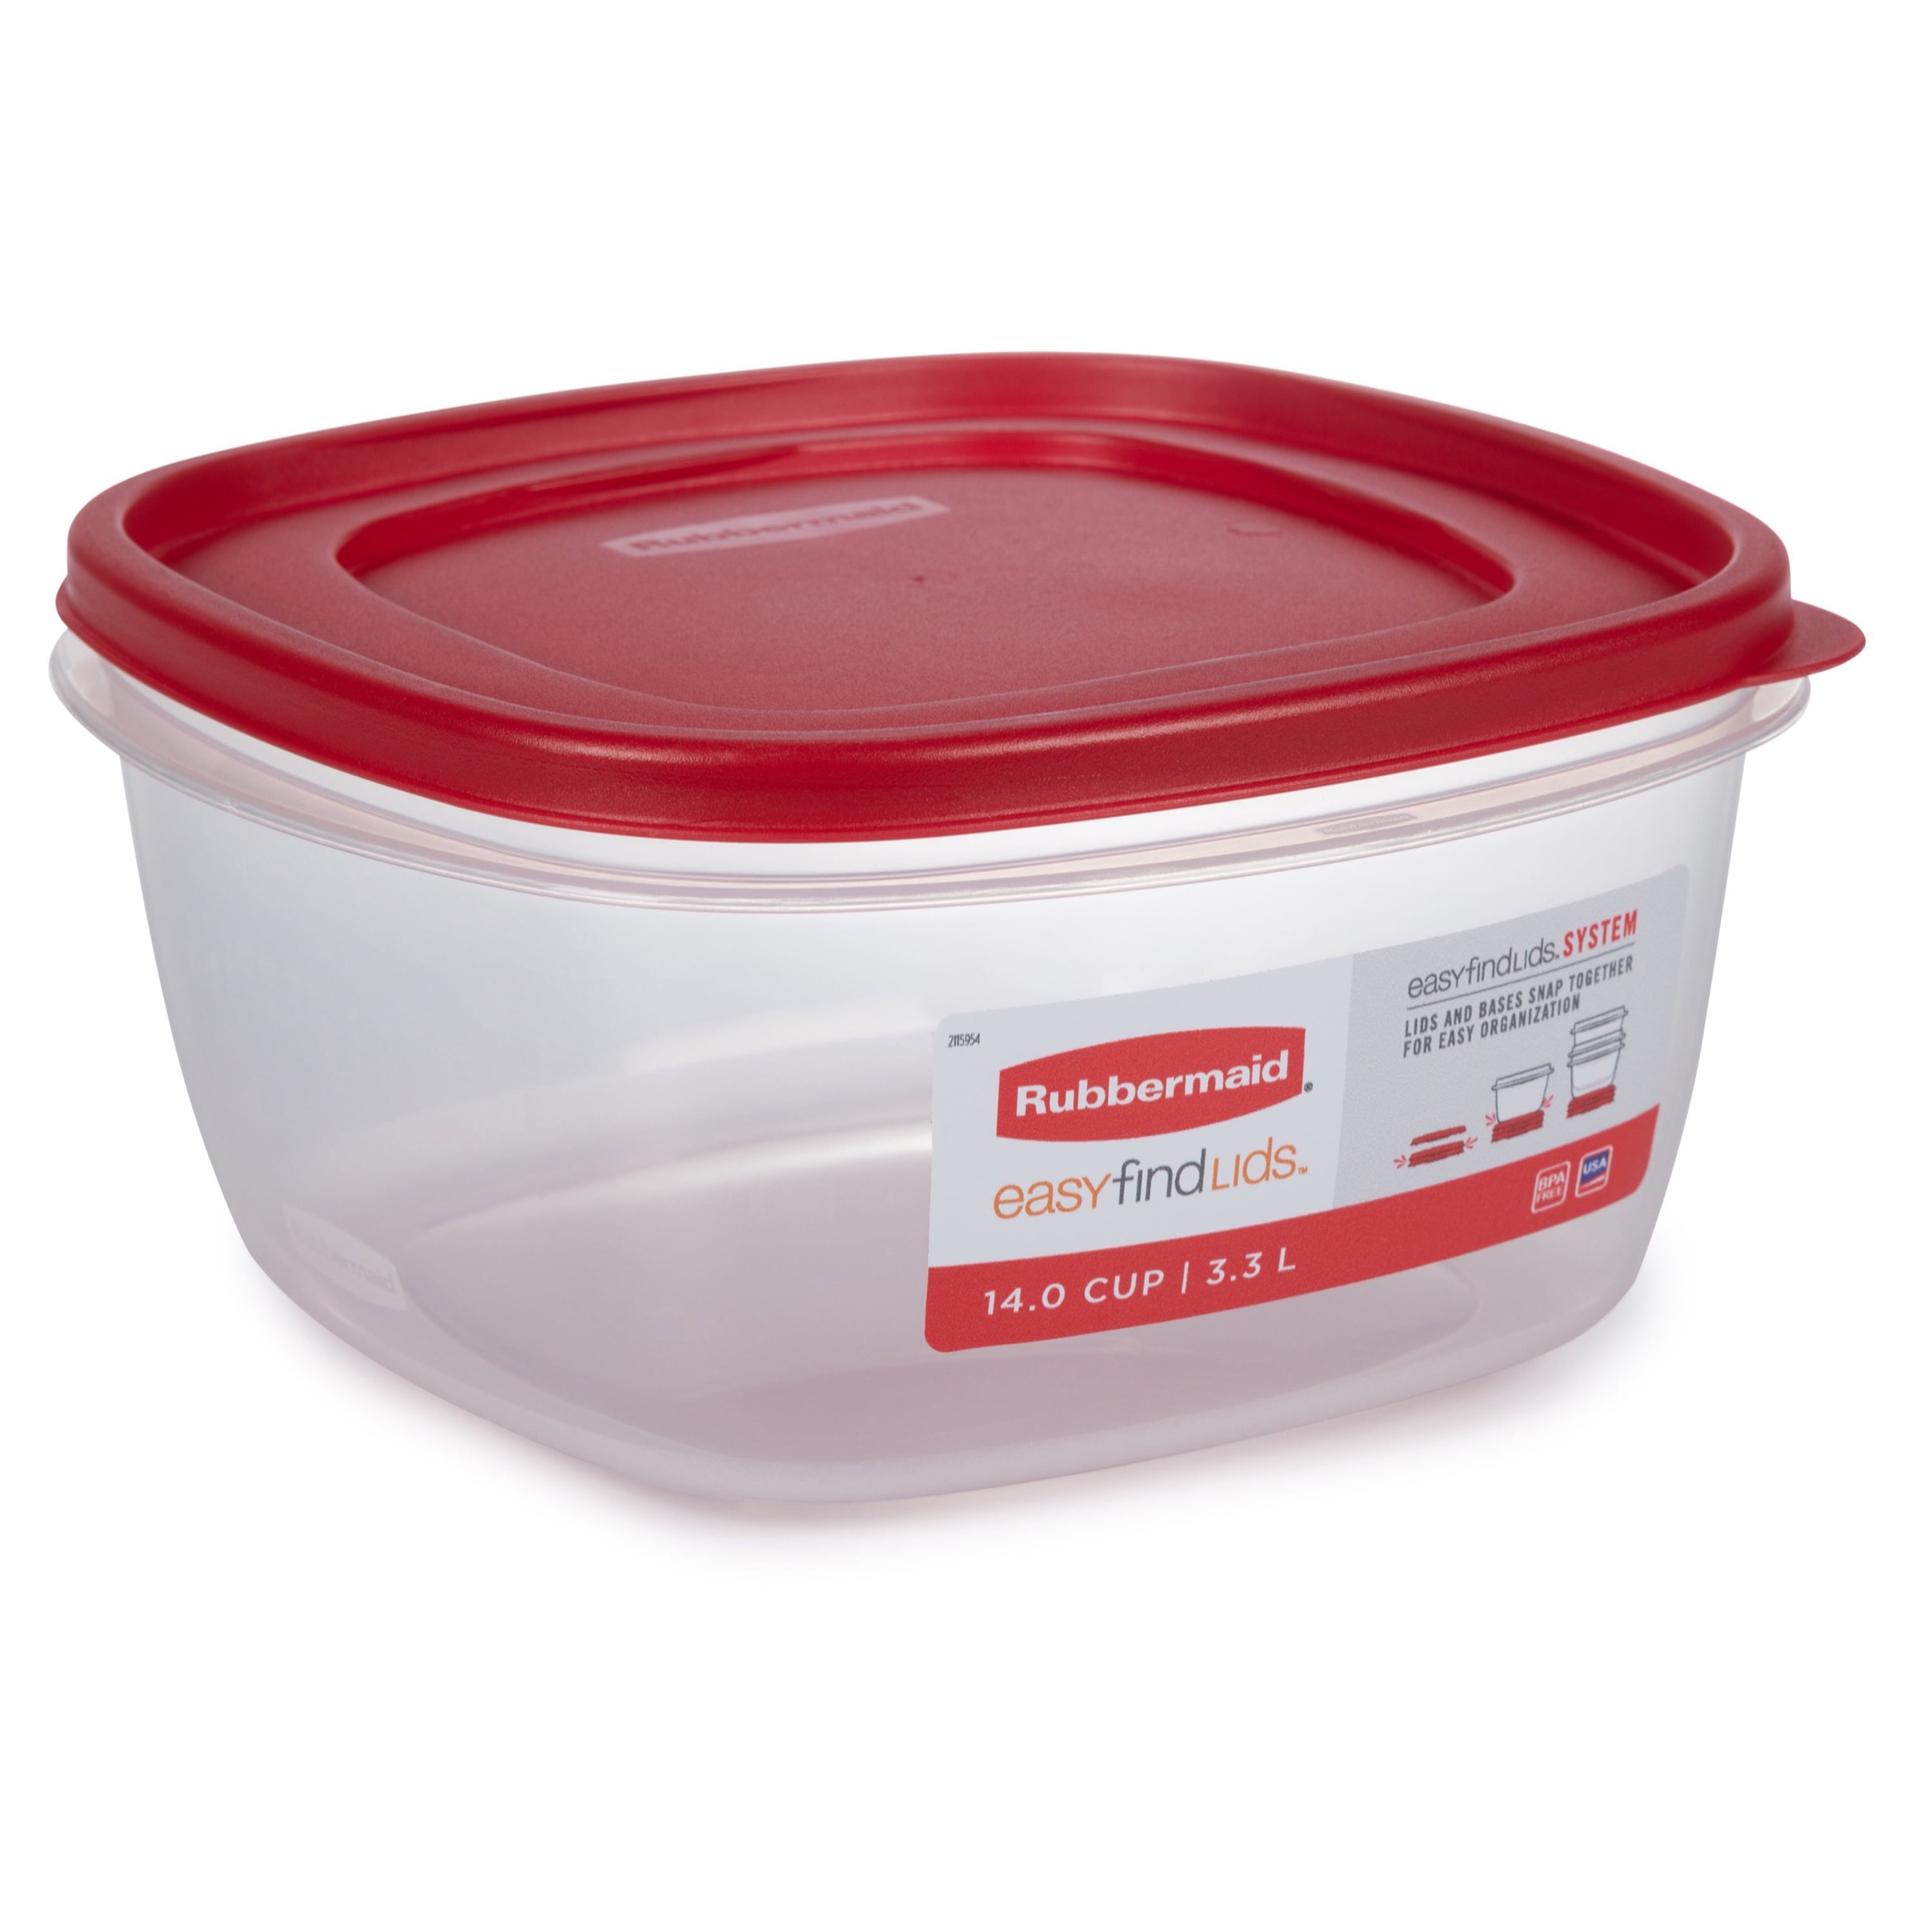 Rubbermaid Easy Find Lids Meal Prep Food Storage Containers, 14-Piece Set -  Sam's Club